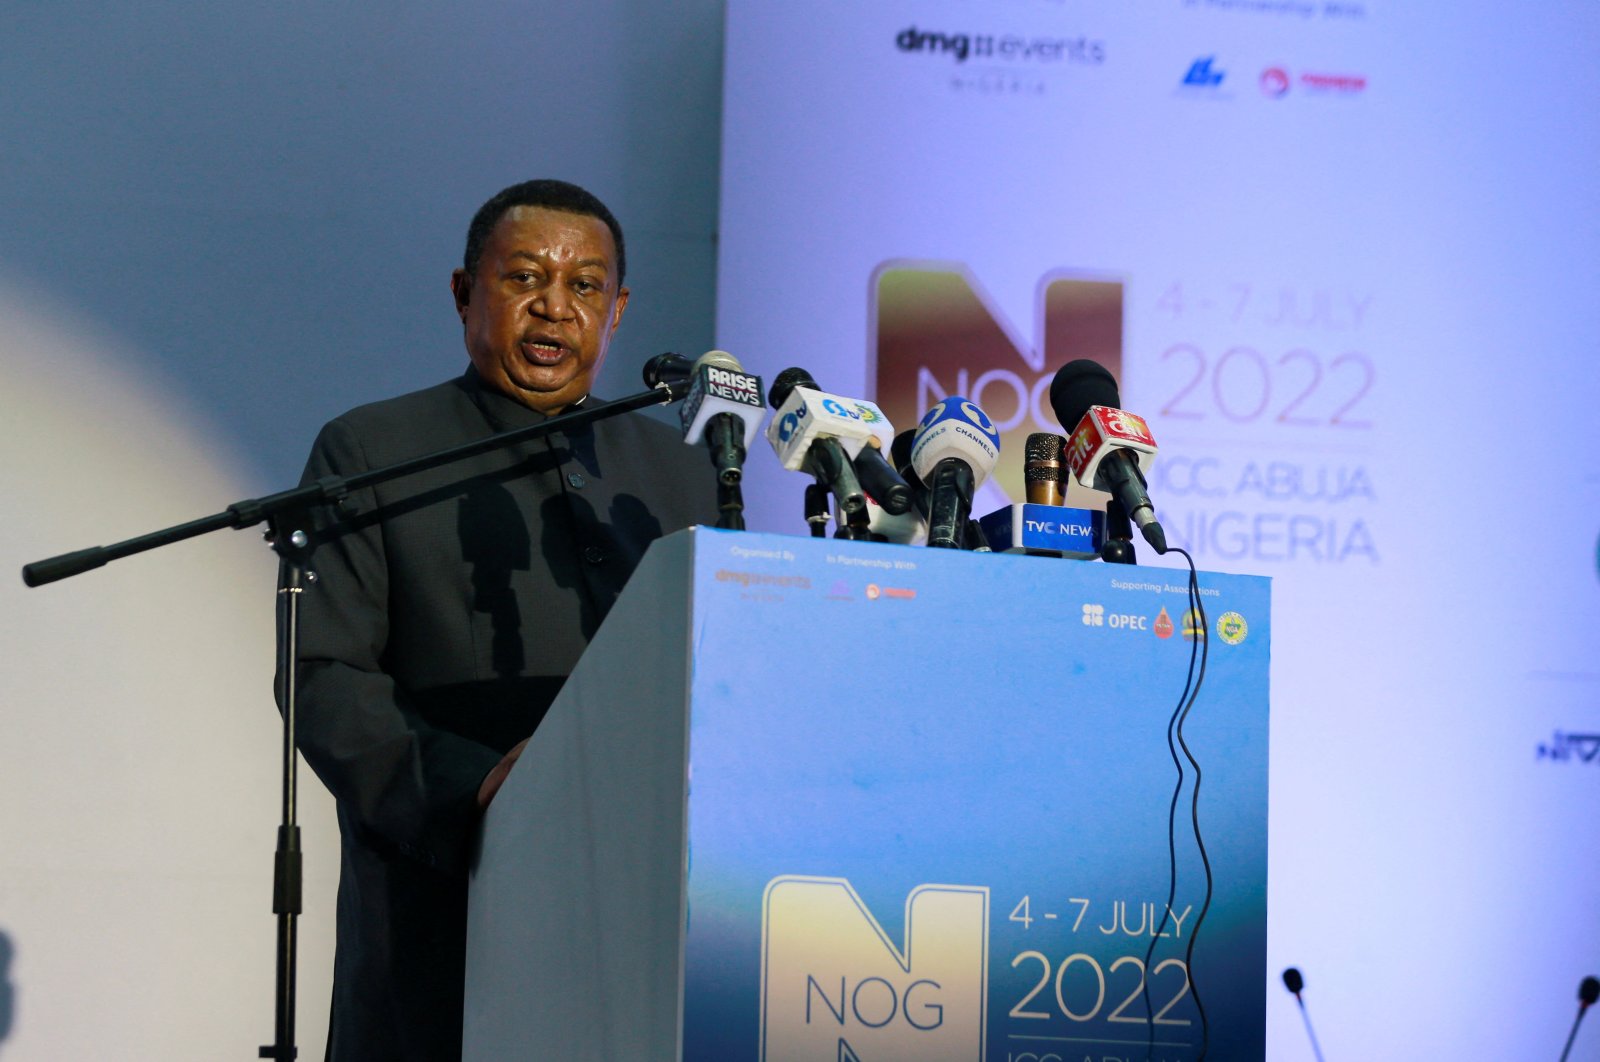 OPEC Secretary-General Mohammad Sanusi Barkindo addresses delegates at the opening of the Nigeria Oil & Gas 2022 meeting in Abuja, Nigeria, July 5, 2022. (Reuters Photo)